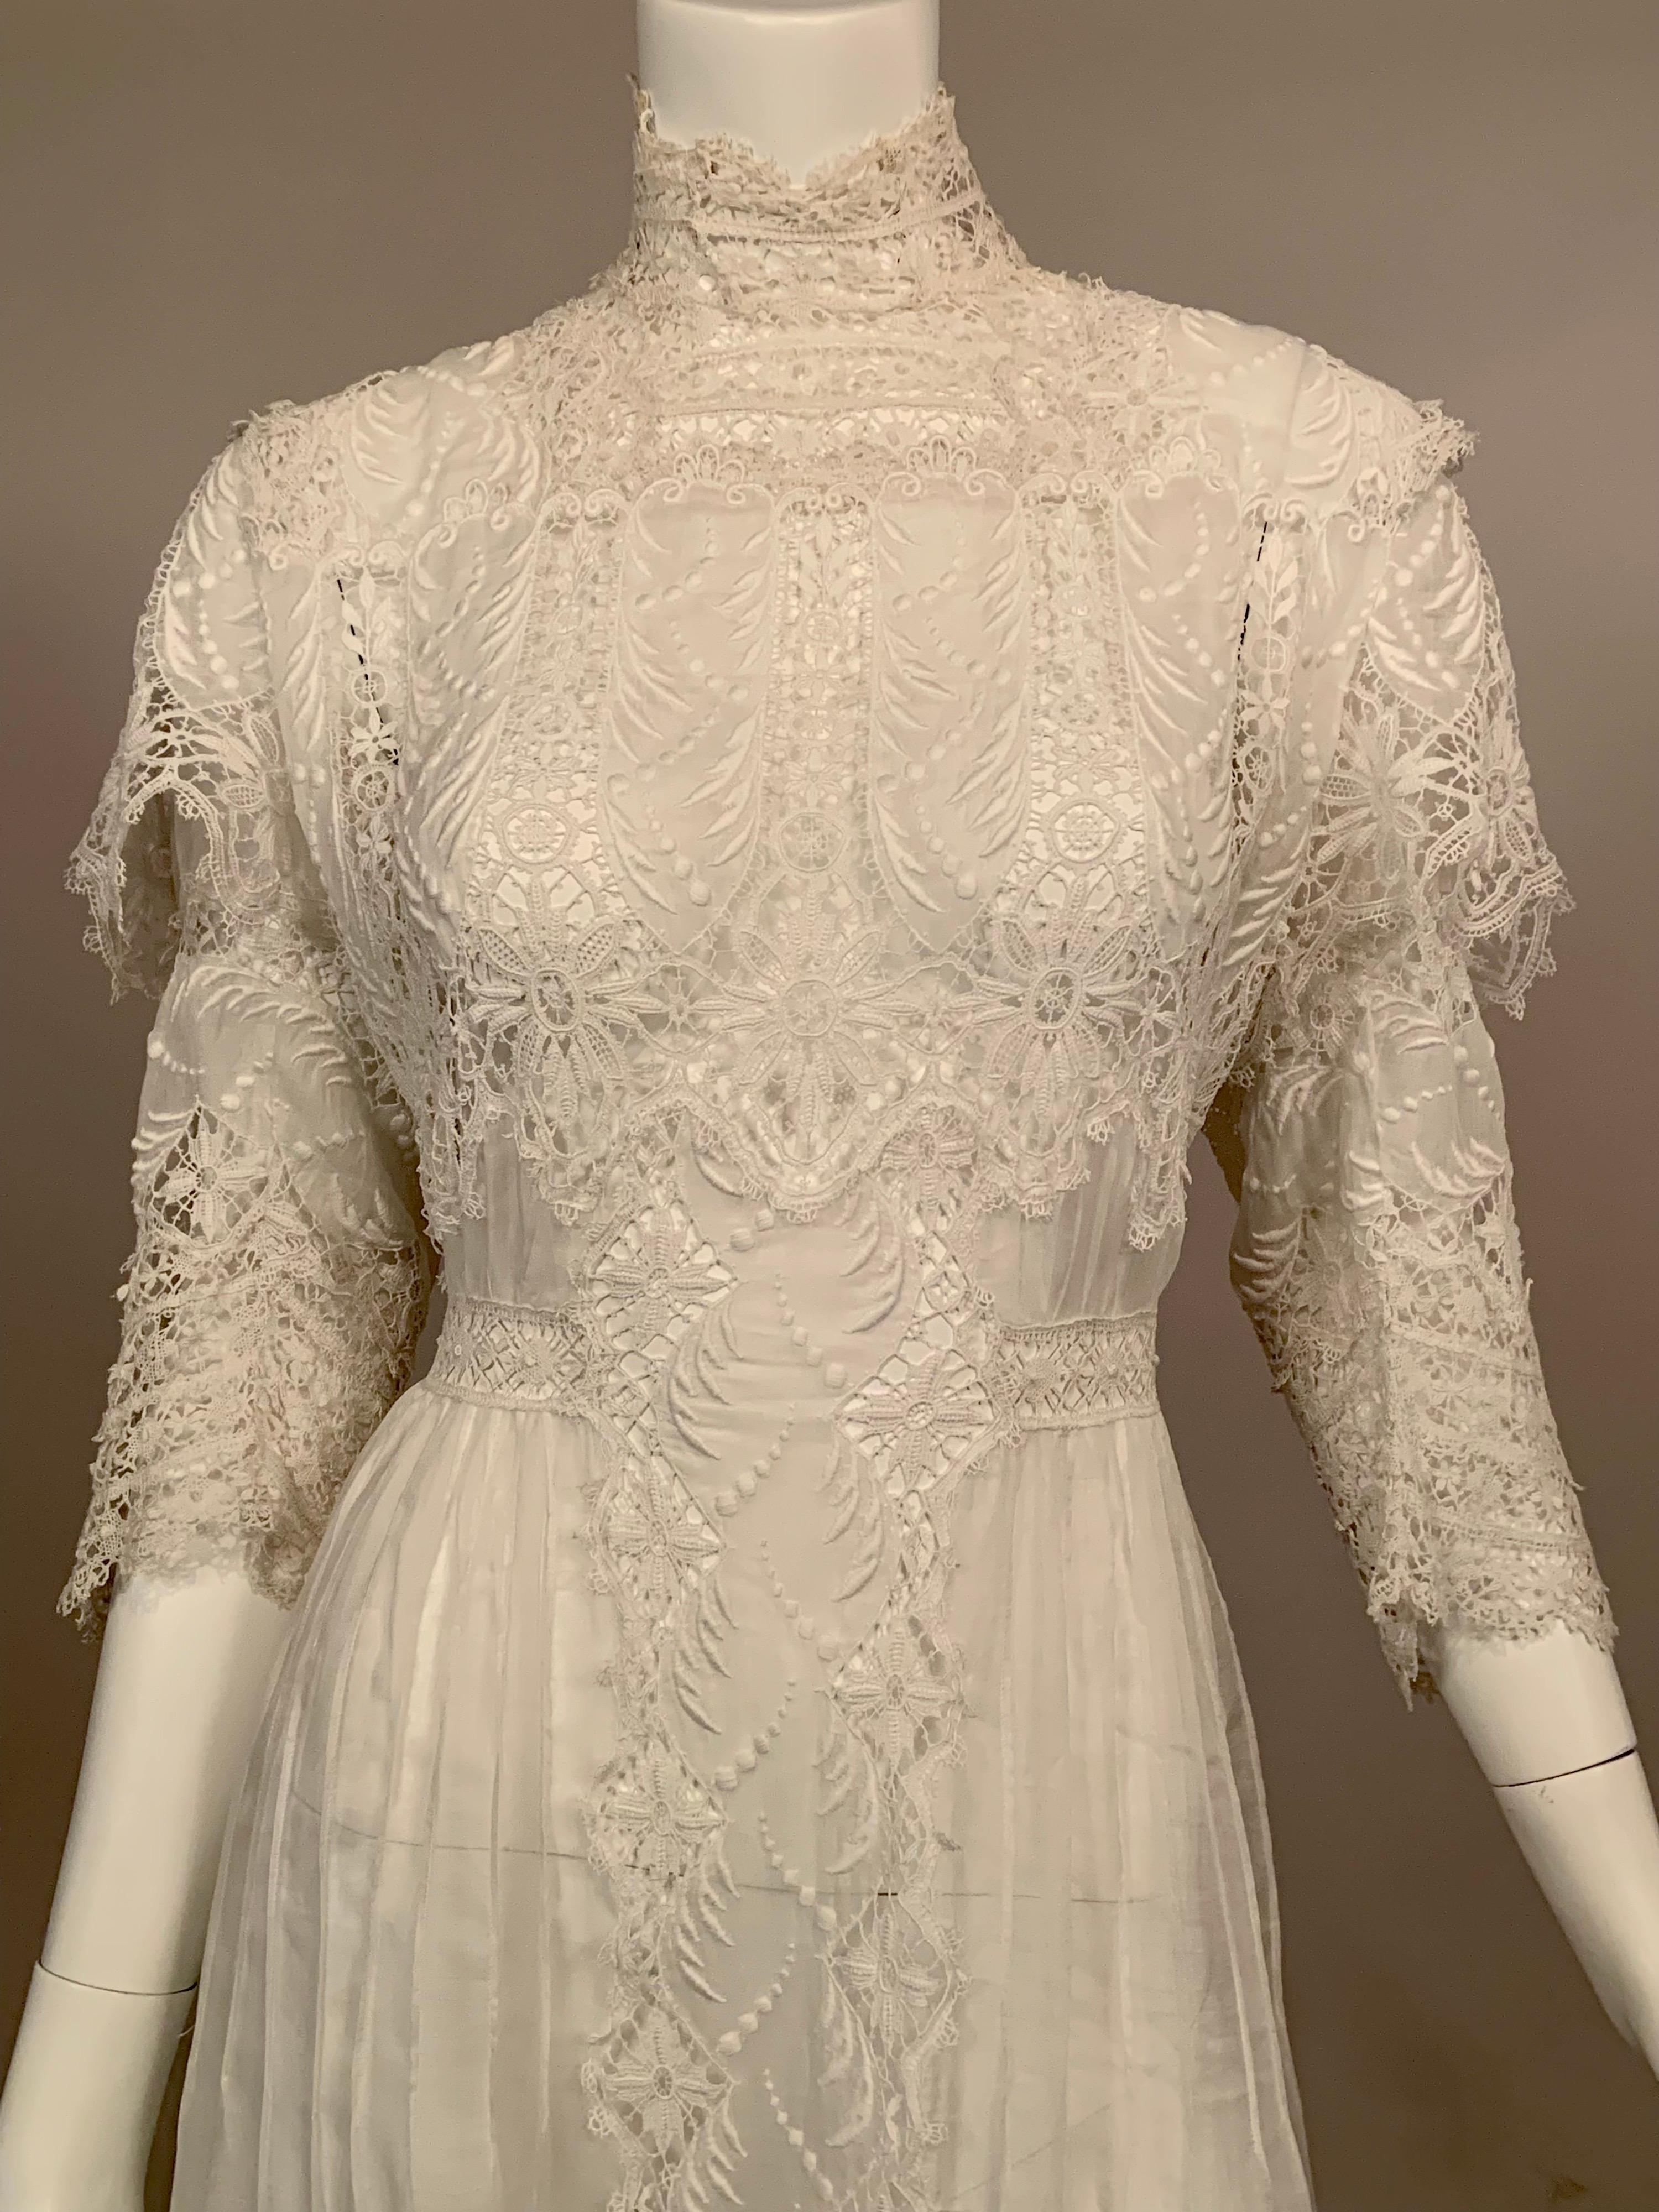 This very rare larger size Victorian white handkerchief linen dress is embellished with both hand and machine made lace. The linen is embroidered on the shoulders, bodice, sleeves and a deep border on the skirt of the dress. The dress has a series